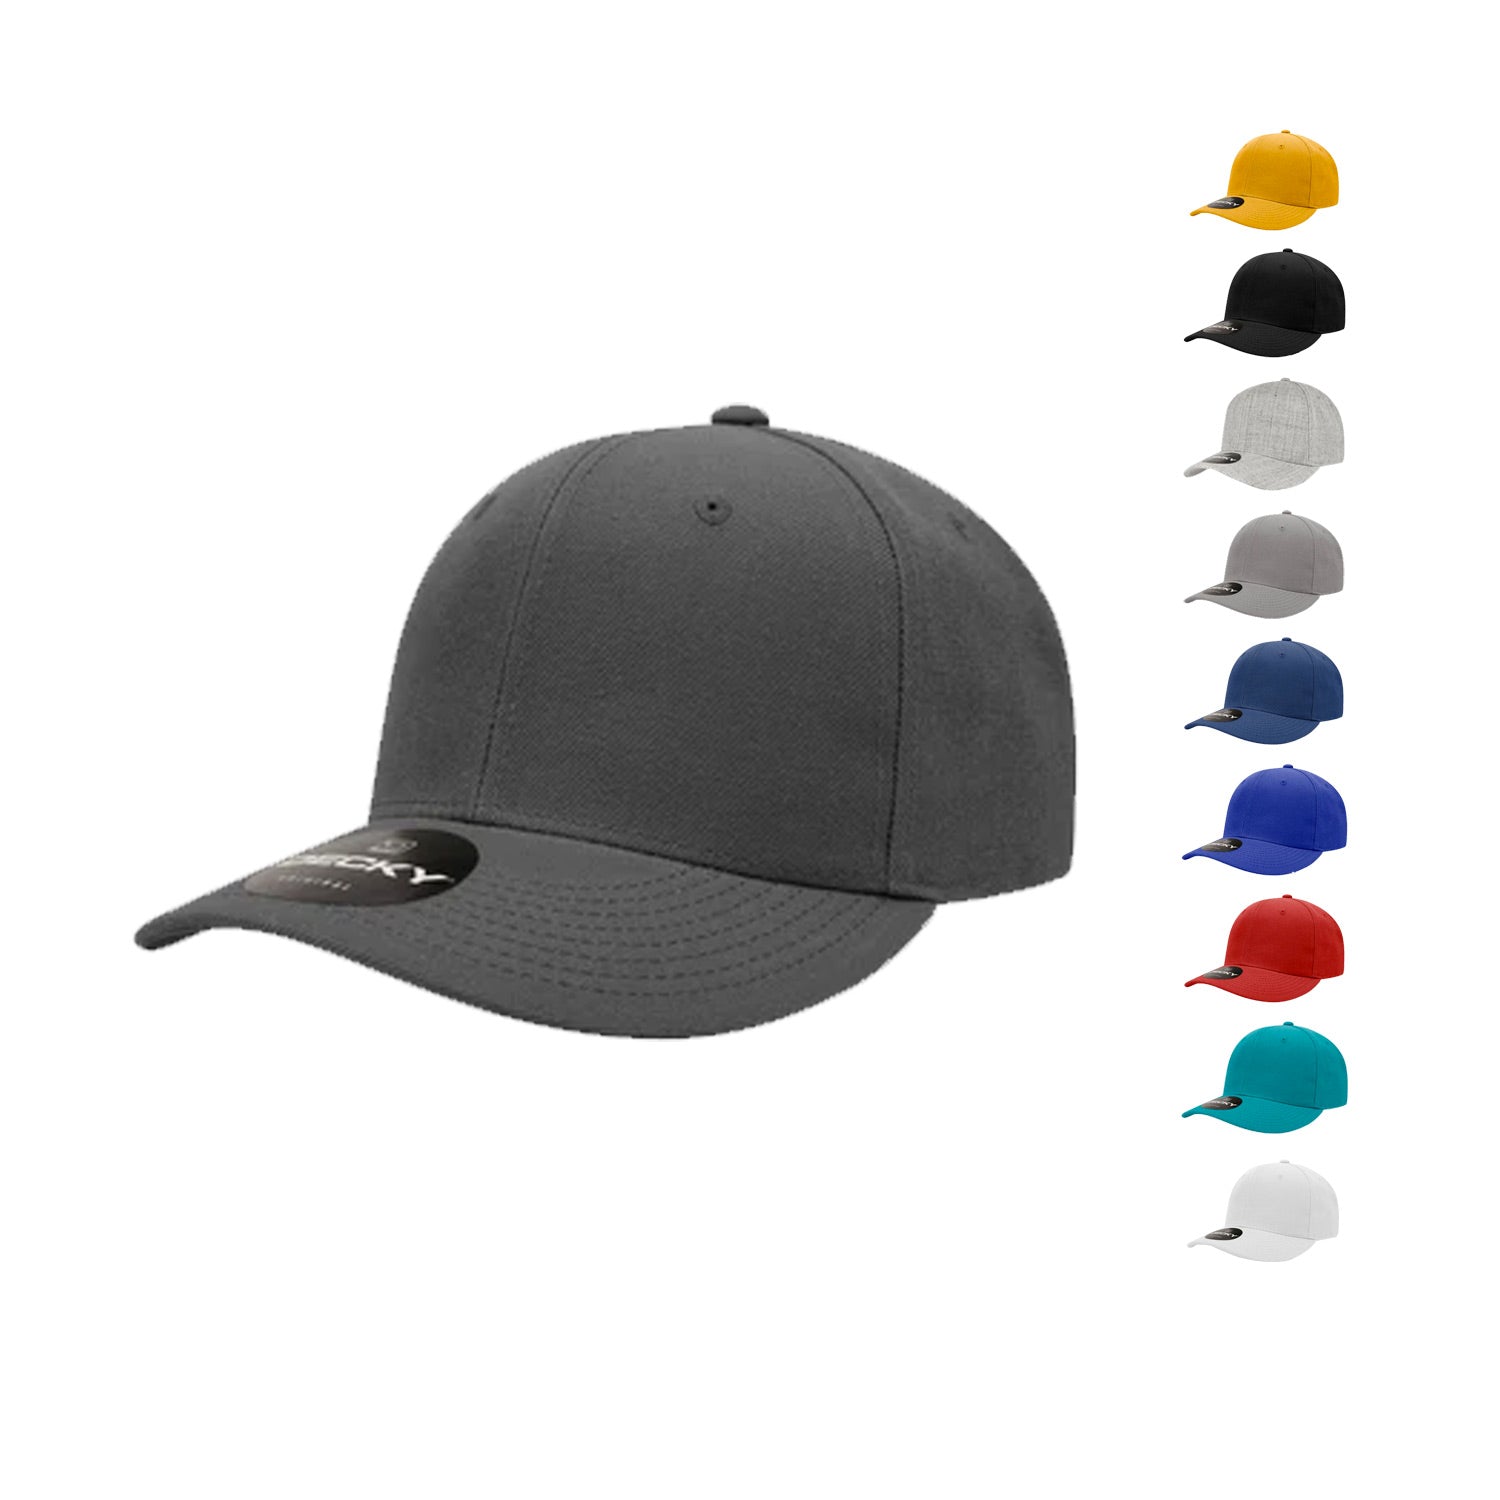 High Hats Decky Trucker Caps Snapback 1040 Profile 5 Blank Structured Panel